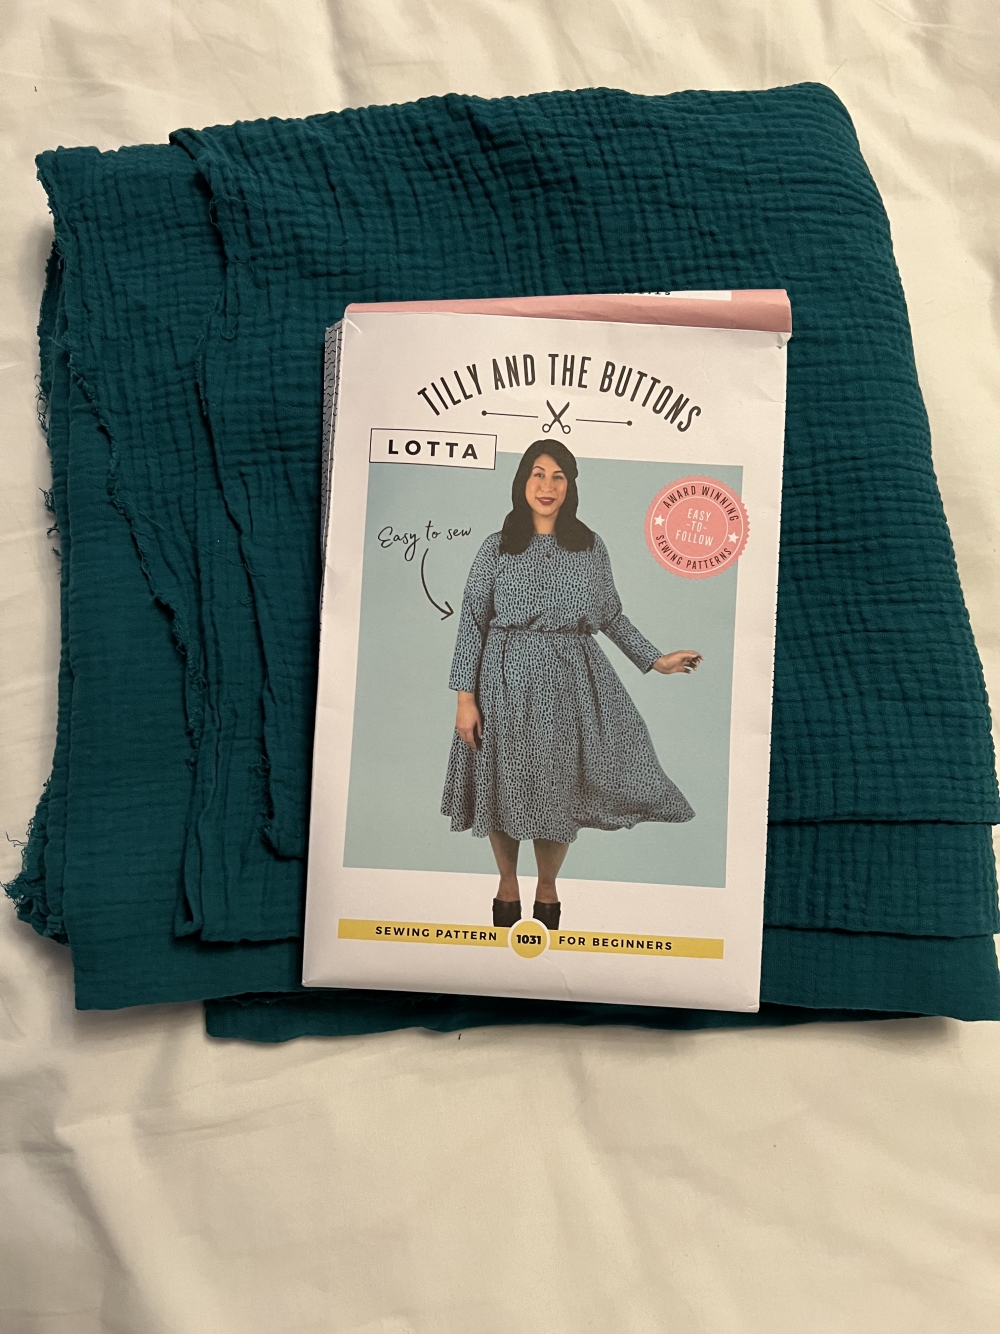 Tilly and the Buttons: How to Sew Japanese Sewing Patterns